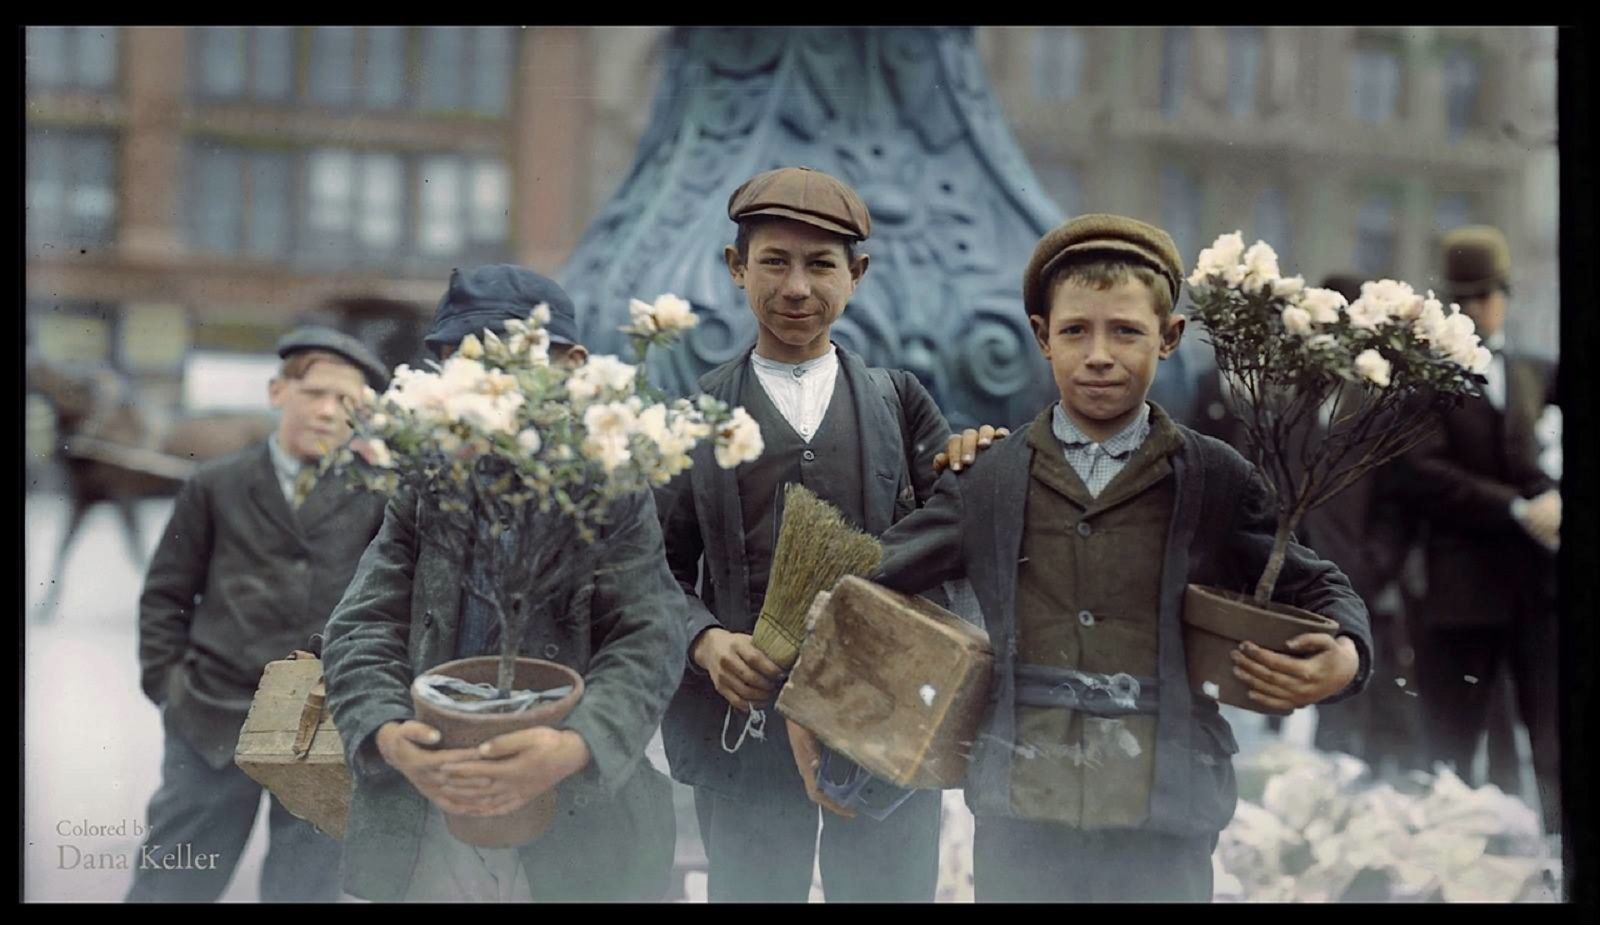 Colourised photos from history image 70